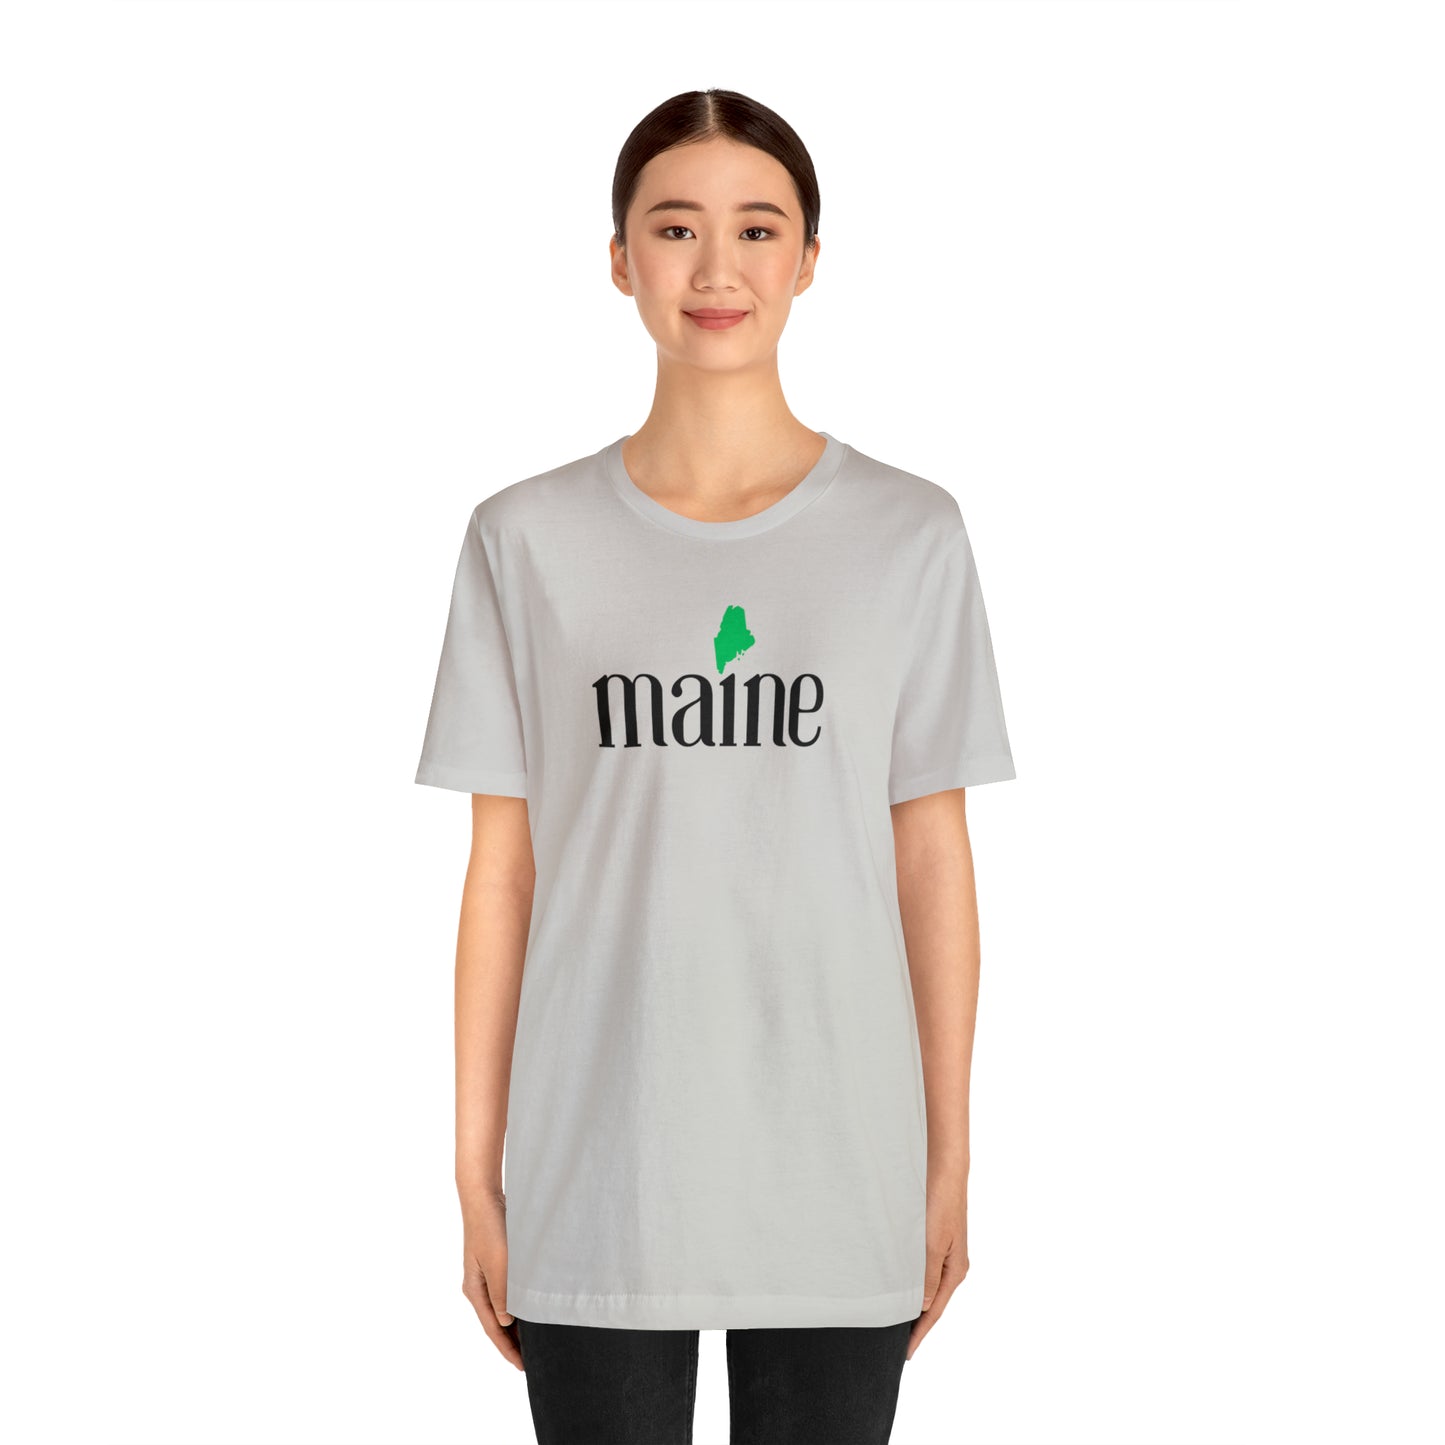 Maine T-Shirt with State Silhouette Short Sleeve Tee